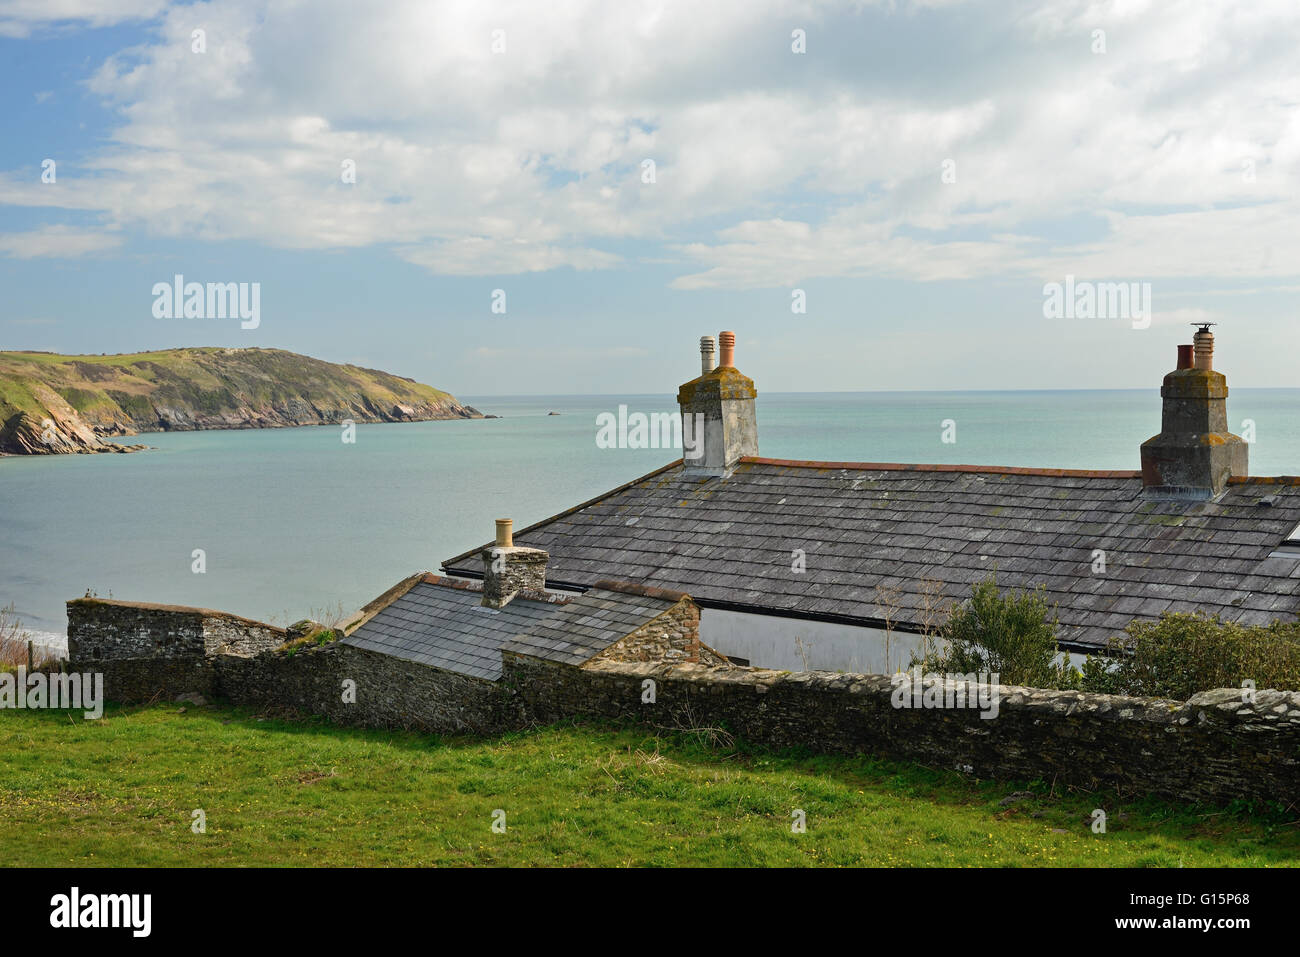 Former coastguard cottages at Man Sands, a secluded bay on the South Devon coast. Stock Photo